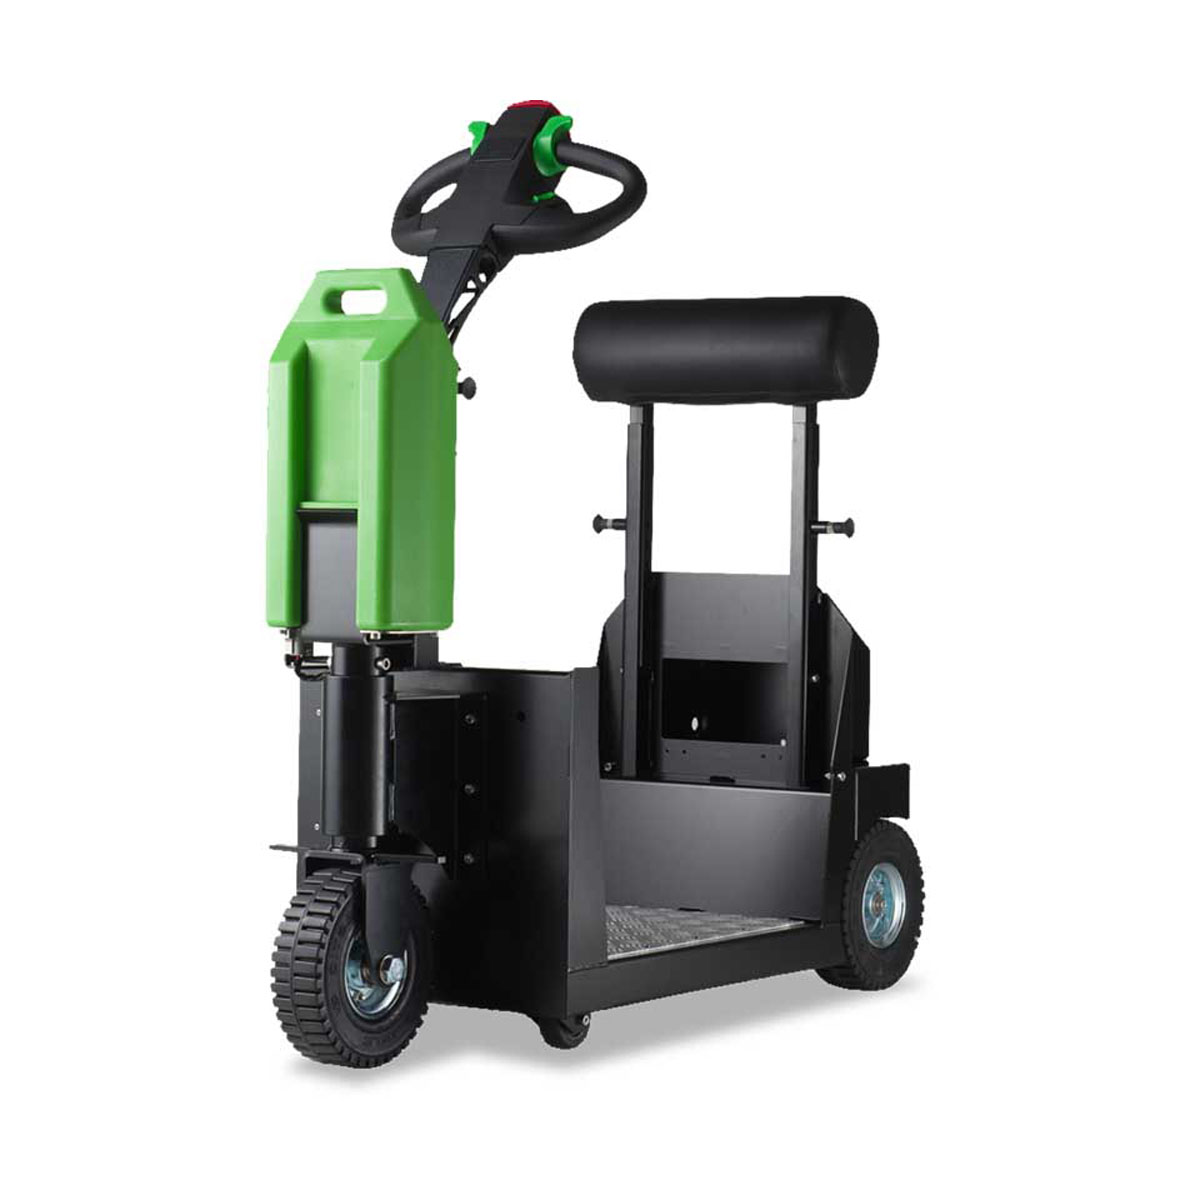 Buy Ride-on Battery Tug  in Electric Tugs from Movexx available at Astrolift NZ